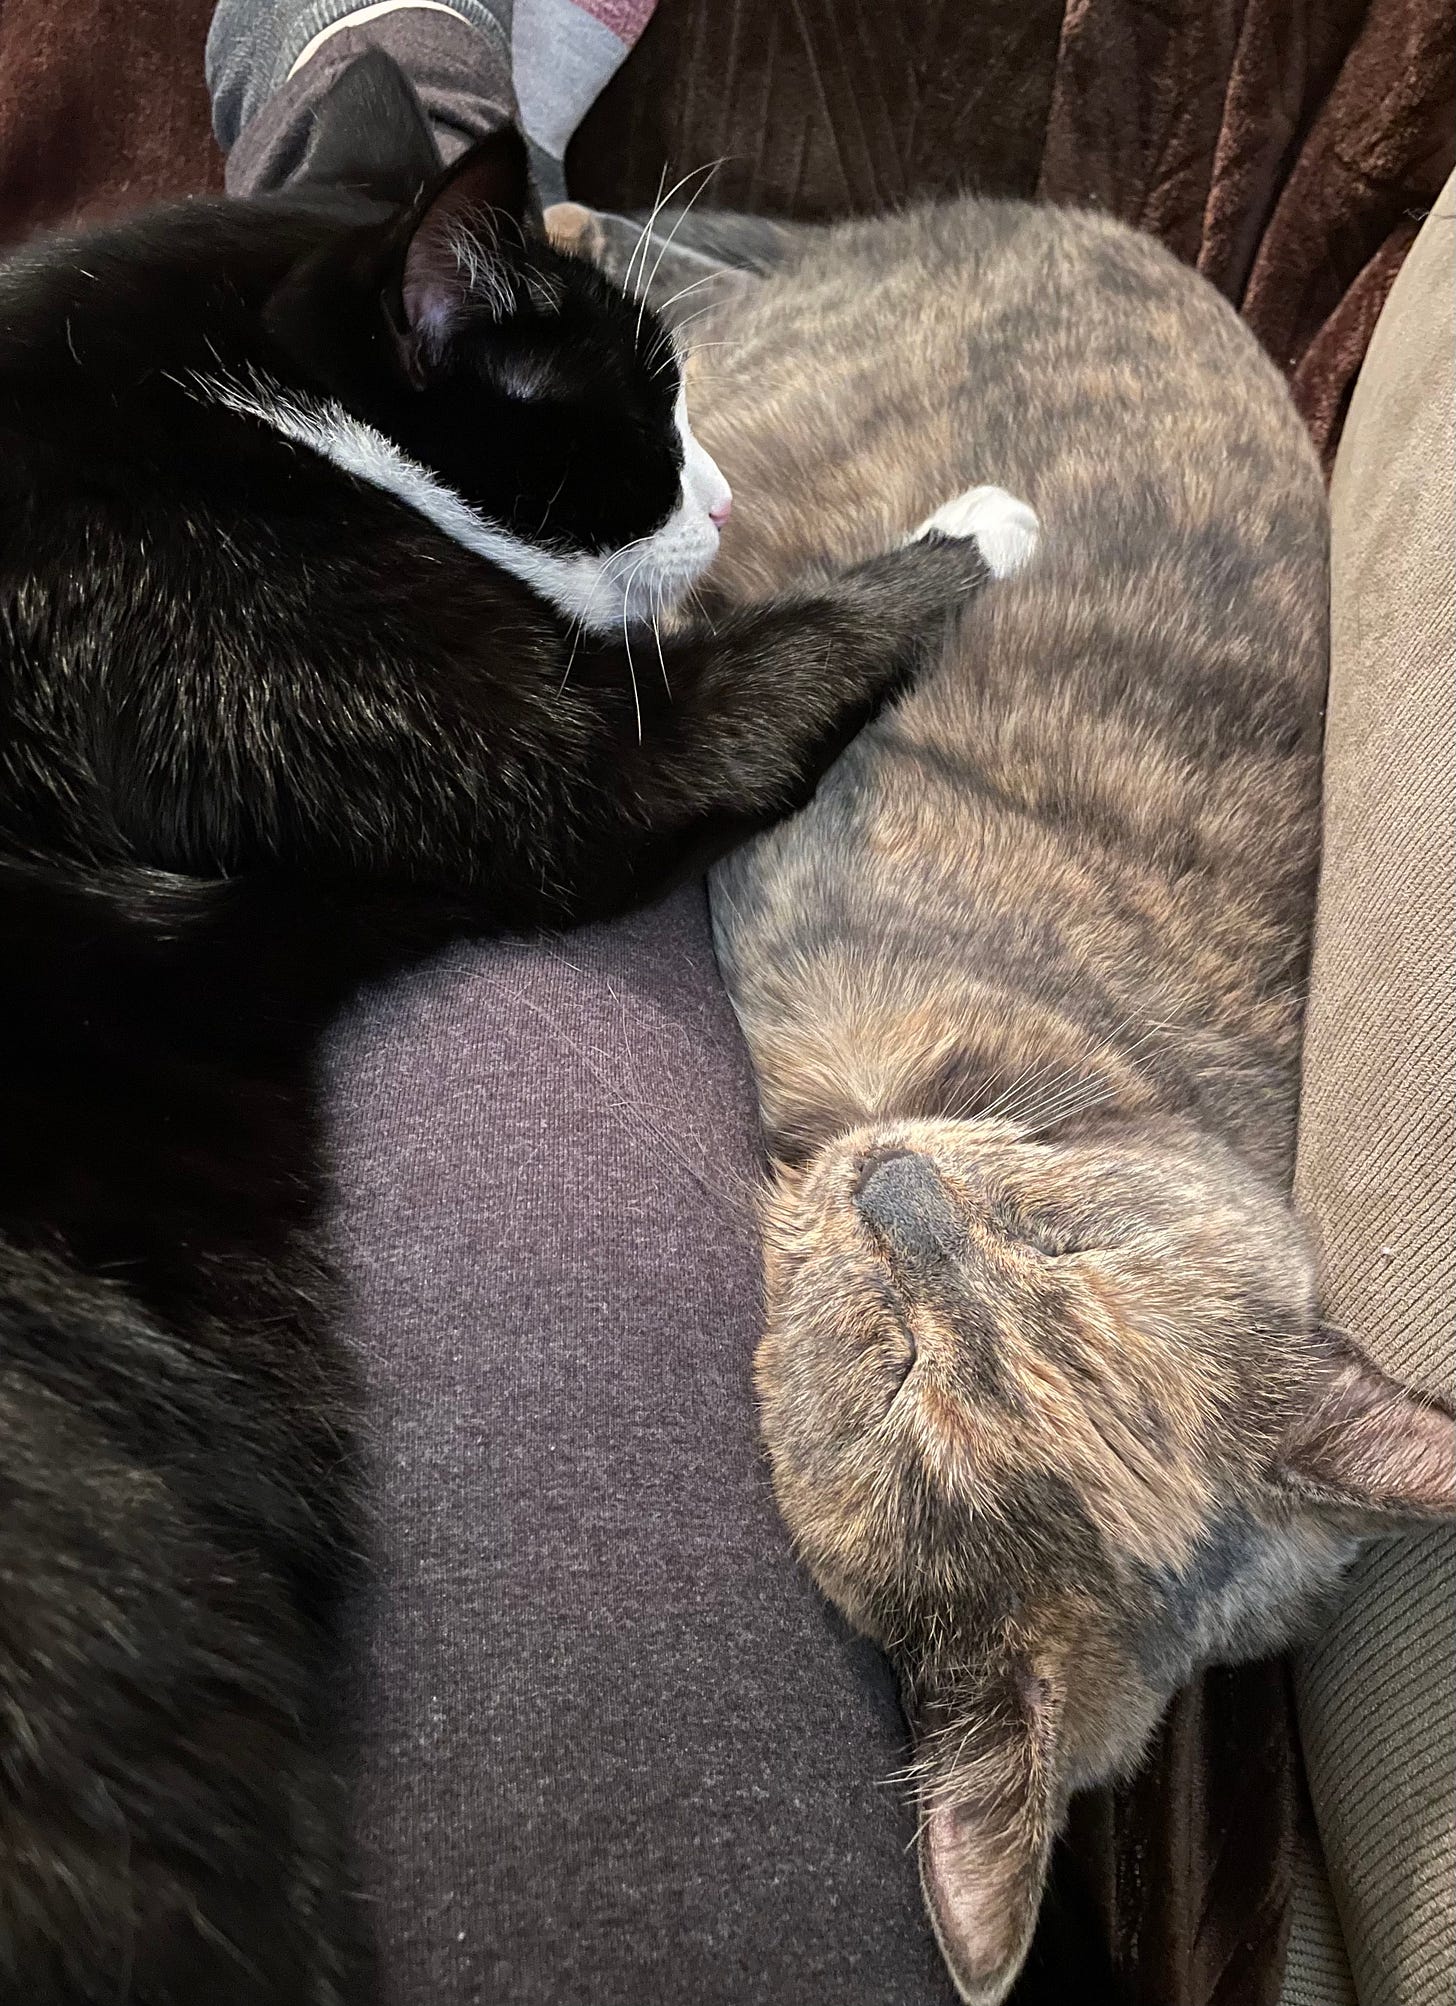 Center: a person’s leg, in dark gray leggings. Right: a dilute tortoiseshell cat is lying on her side, snuggled up against her person. Left: a tuxedo cat sprawled across the person’s leg, with a paw extended onto his sister’s torso.